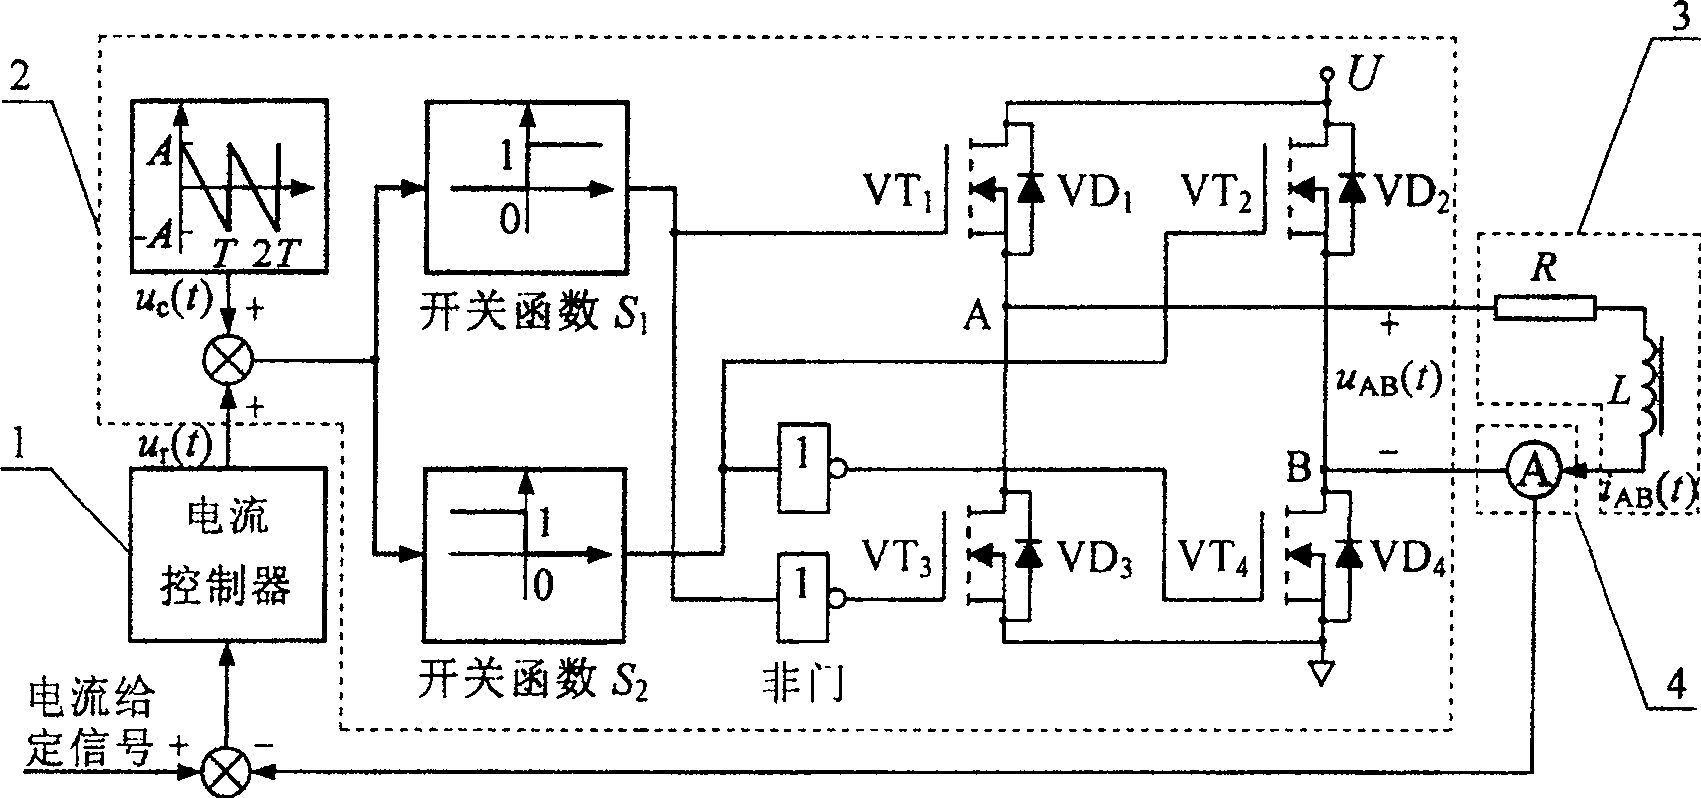 Analytical method for electromagnetic bearing switch power amplifier